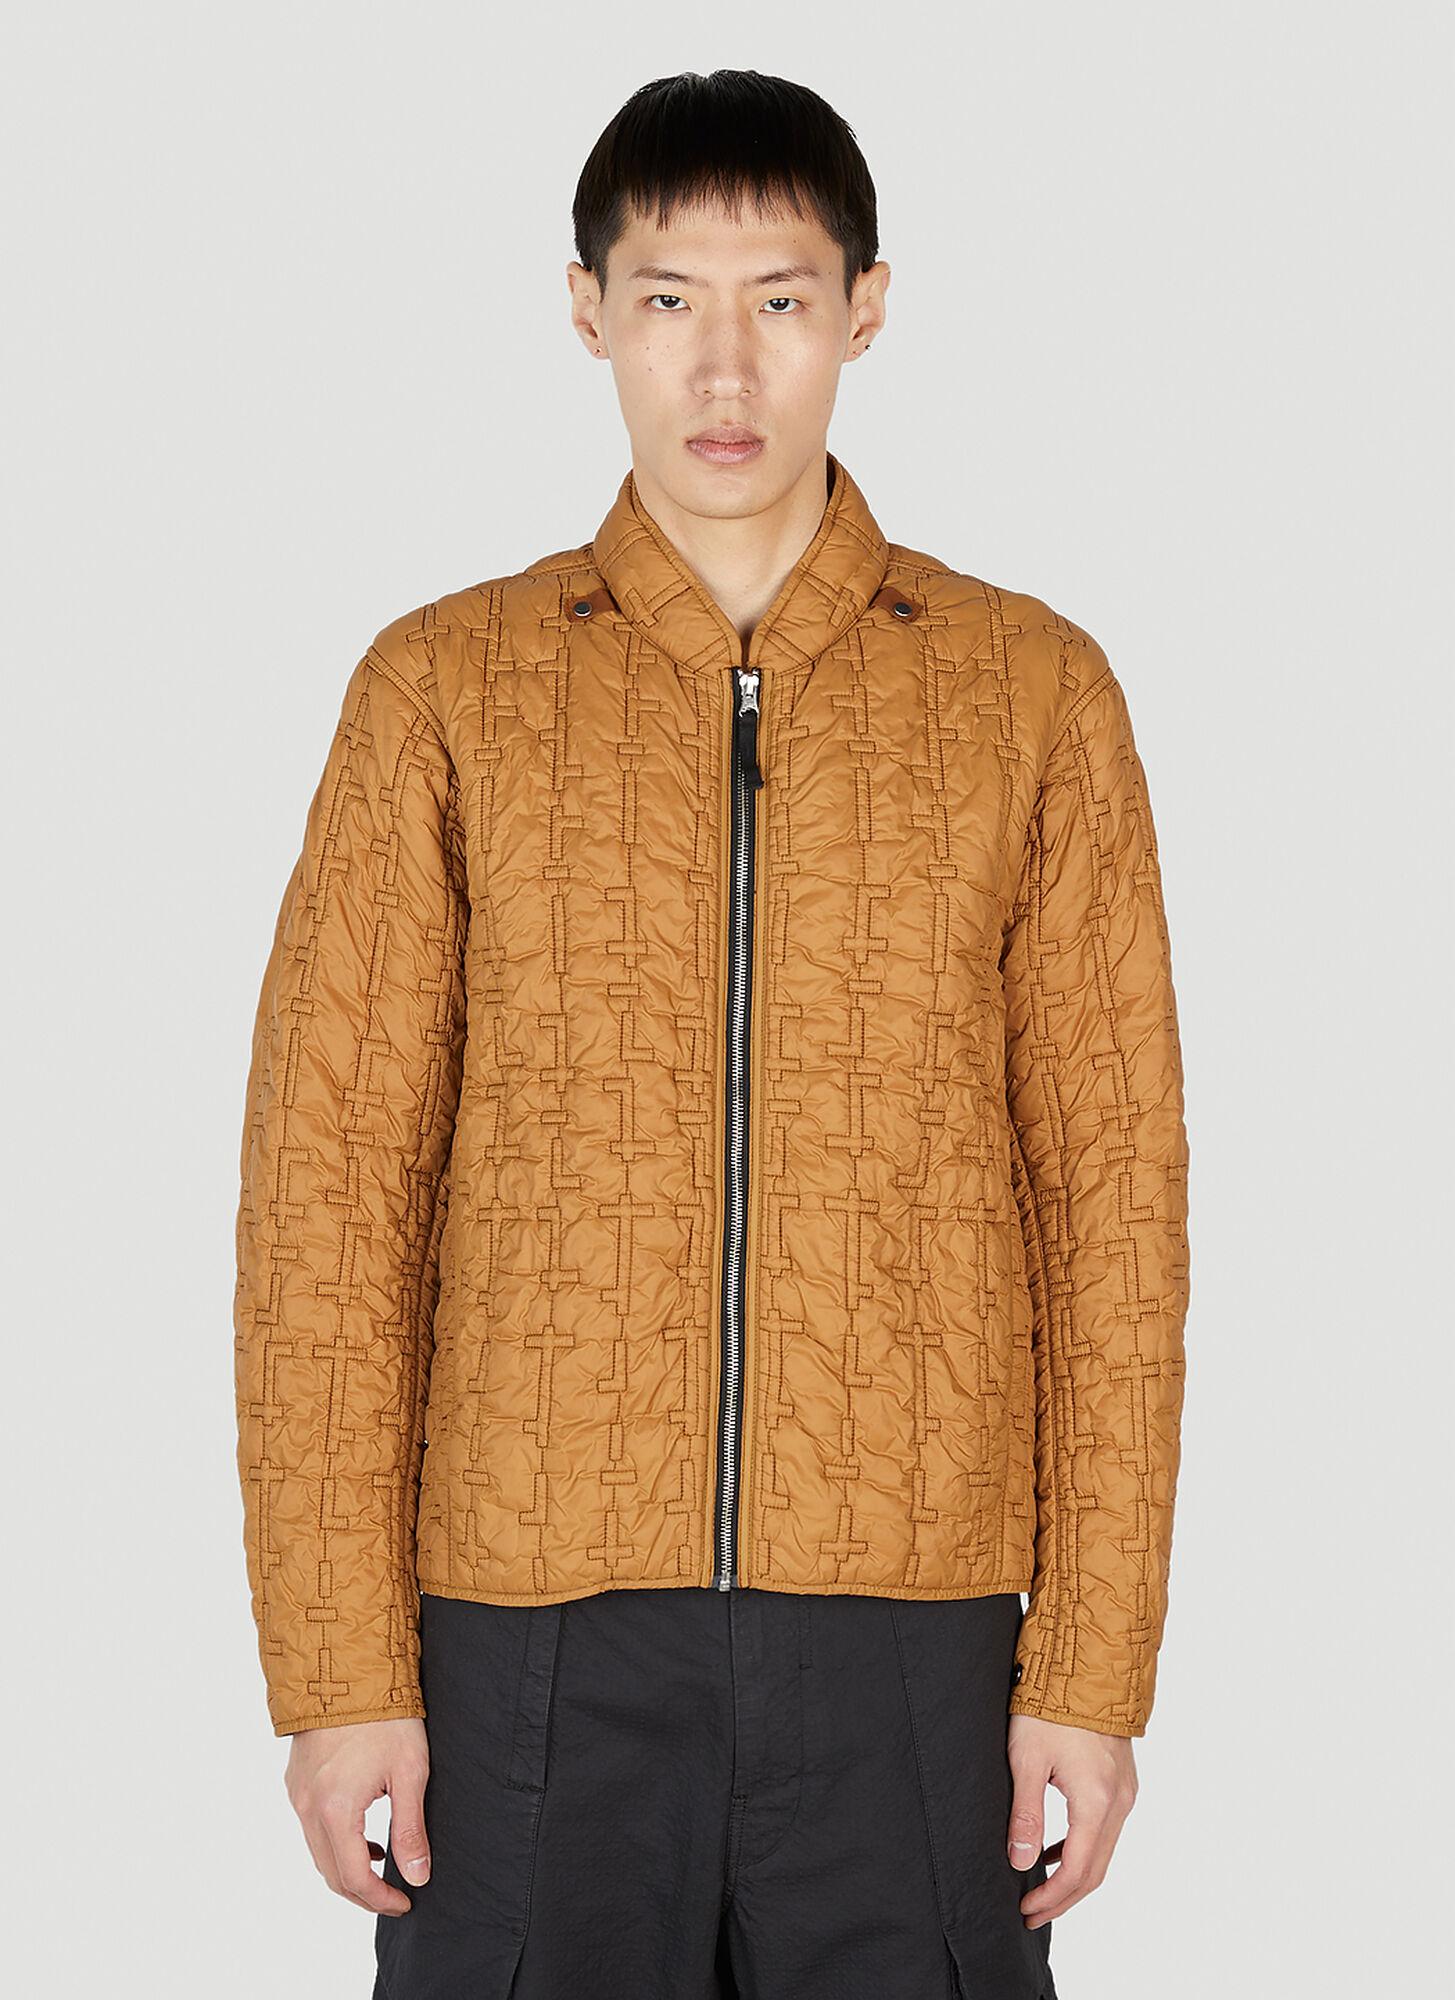 Stone Island Shadow Project Quilted Liner Jacket in Natural for Men | Lyst